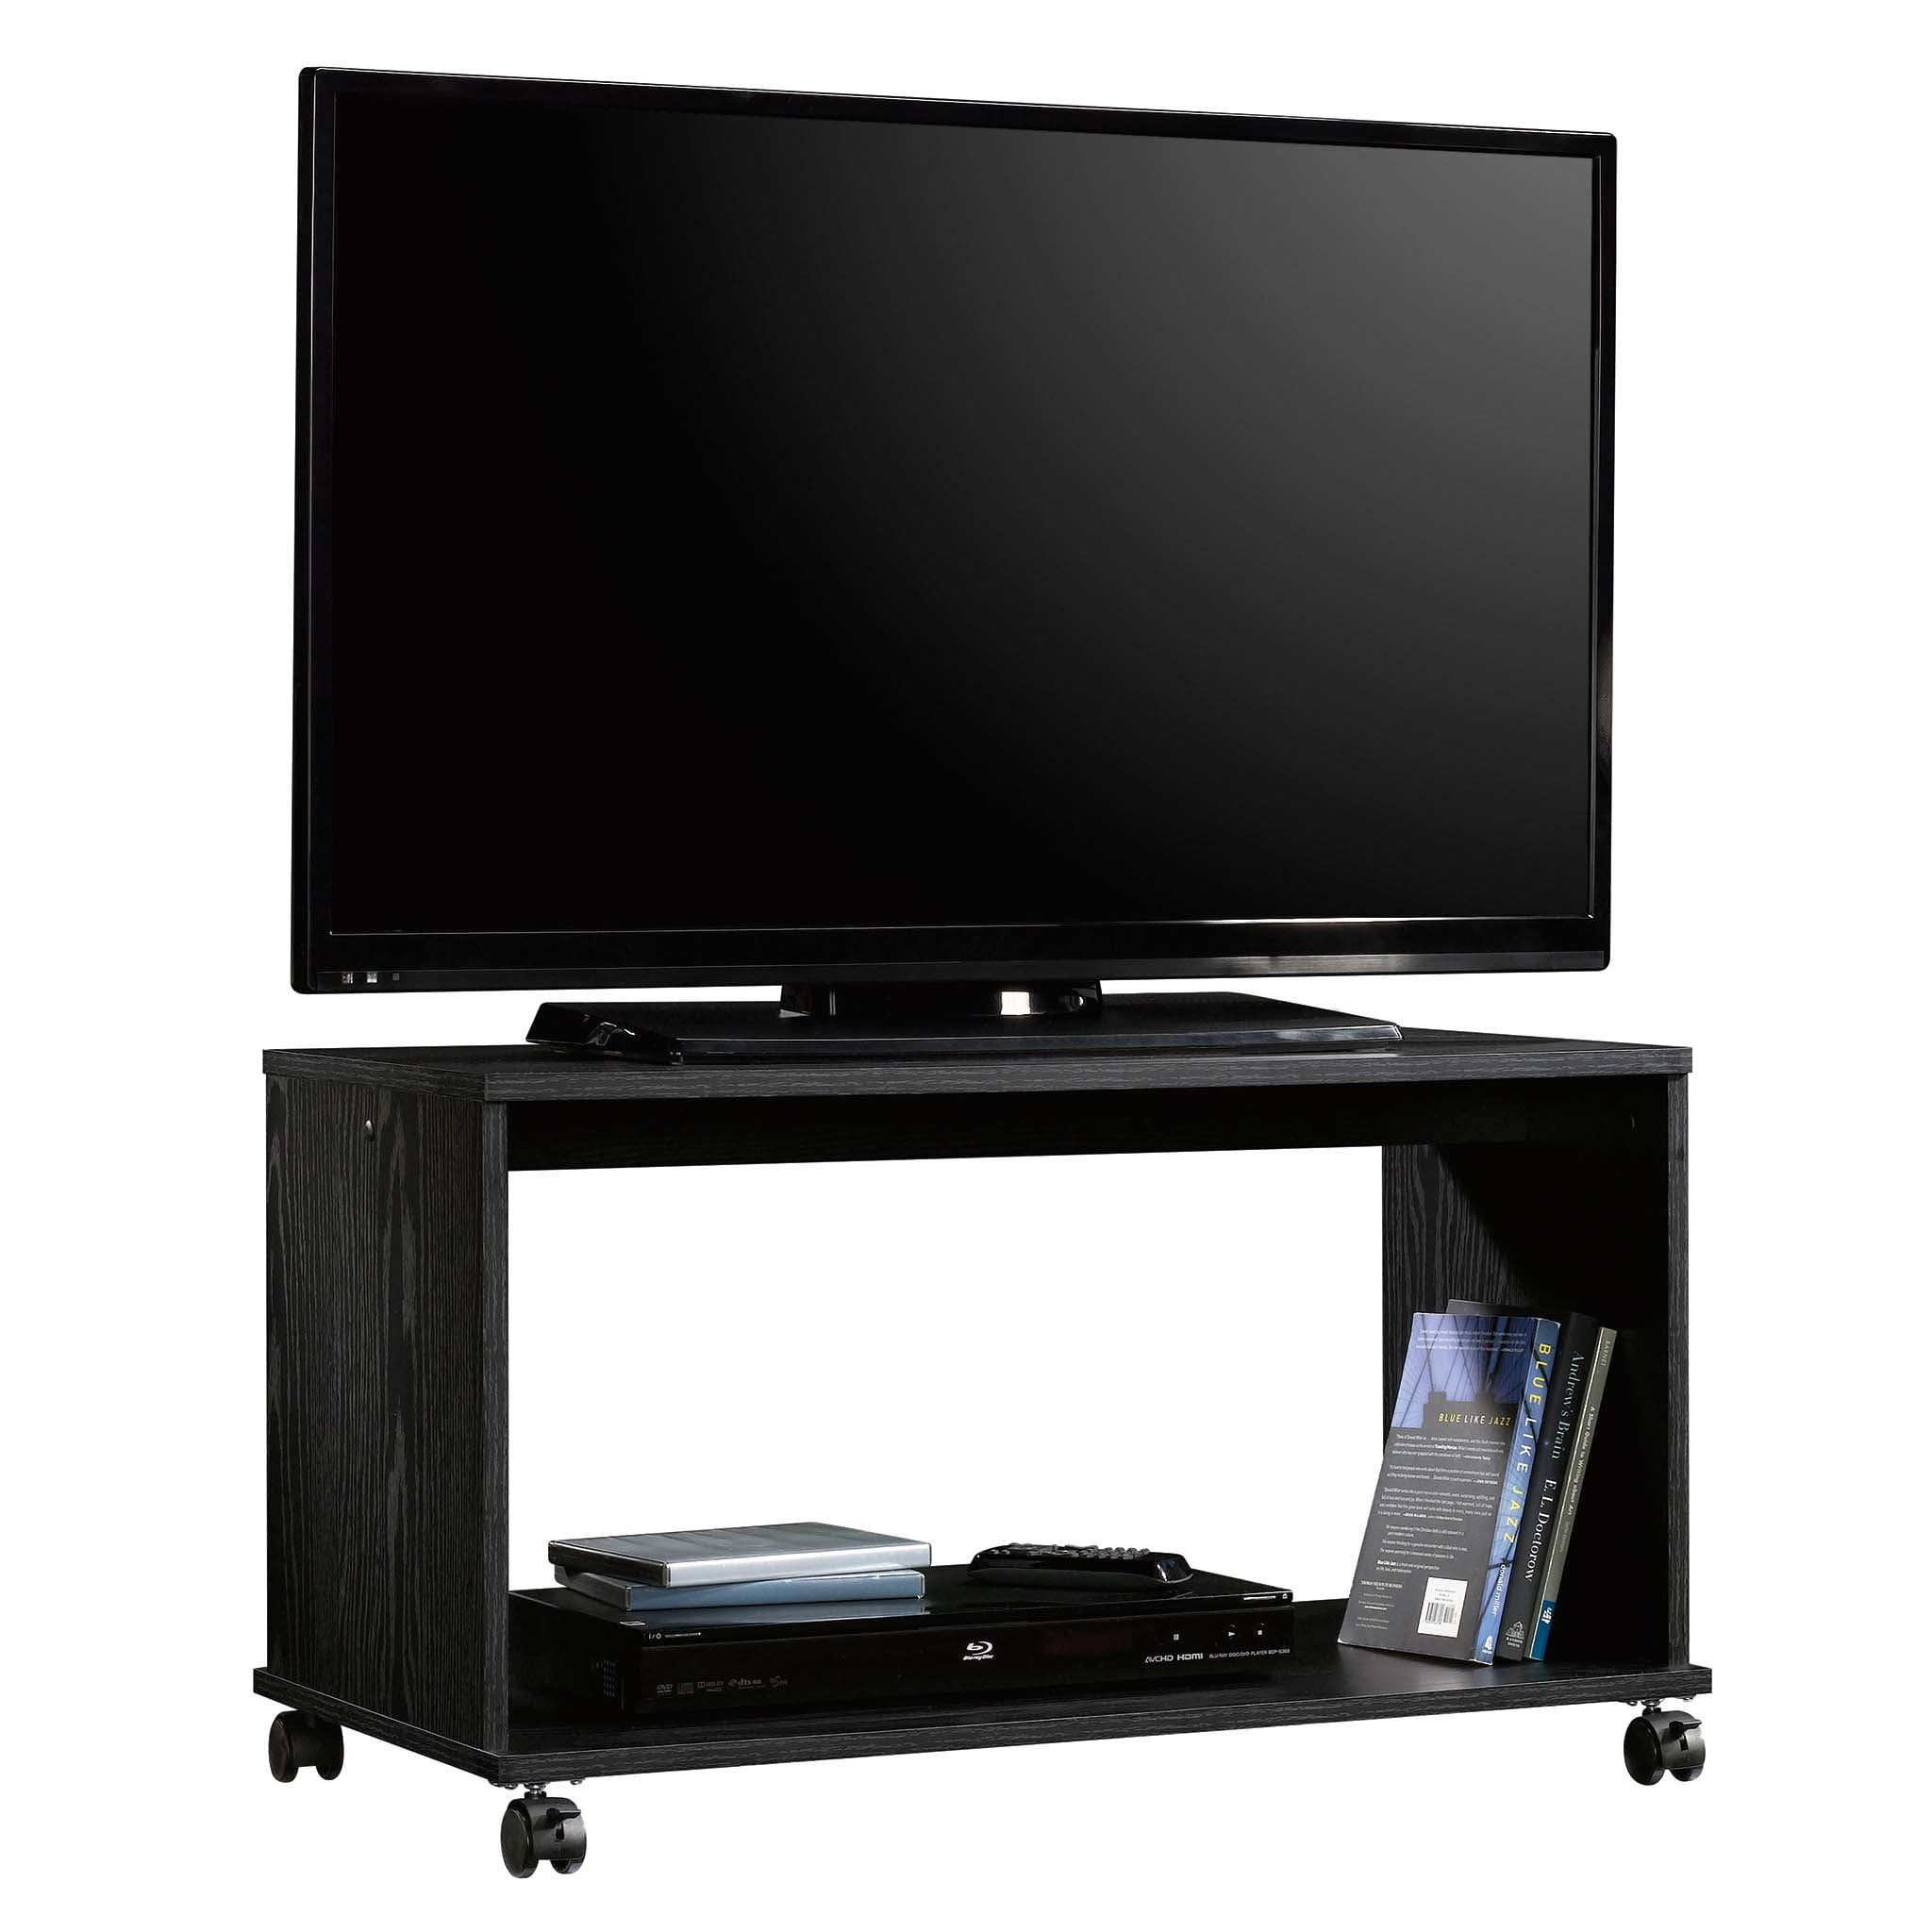 for sale online Mainstays Entertainment Center for TVs up to 55" TV Stand Black MS17-D1-1011-01 